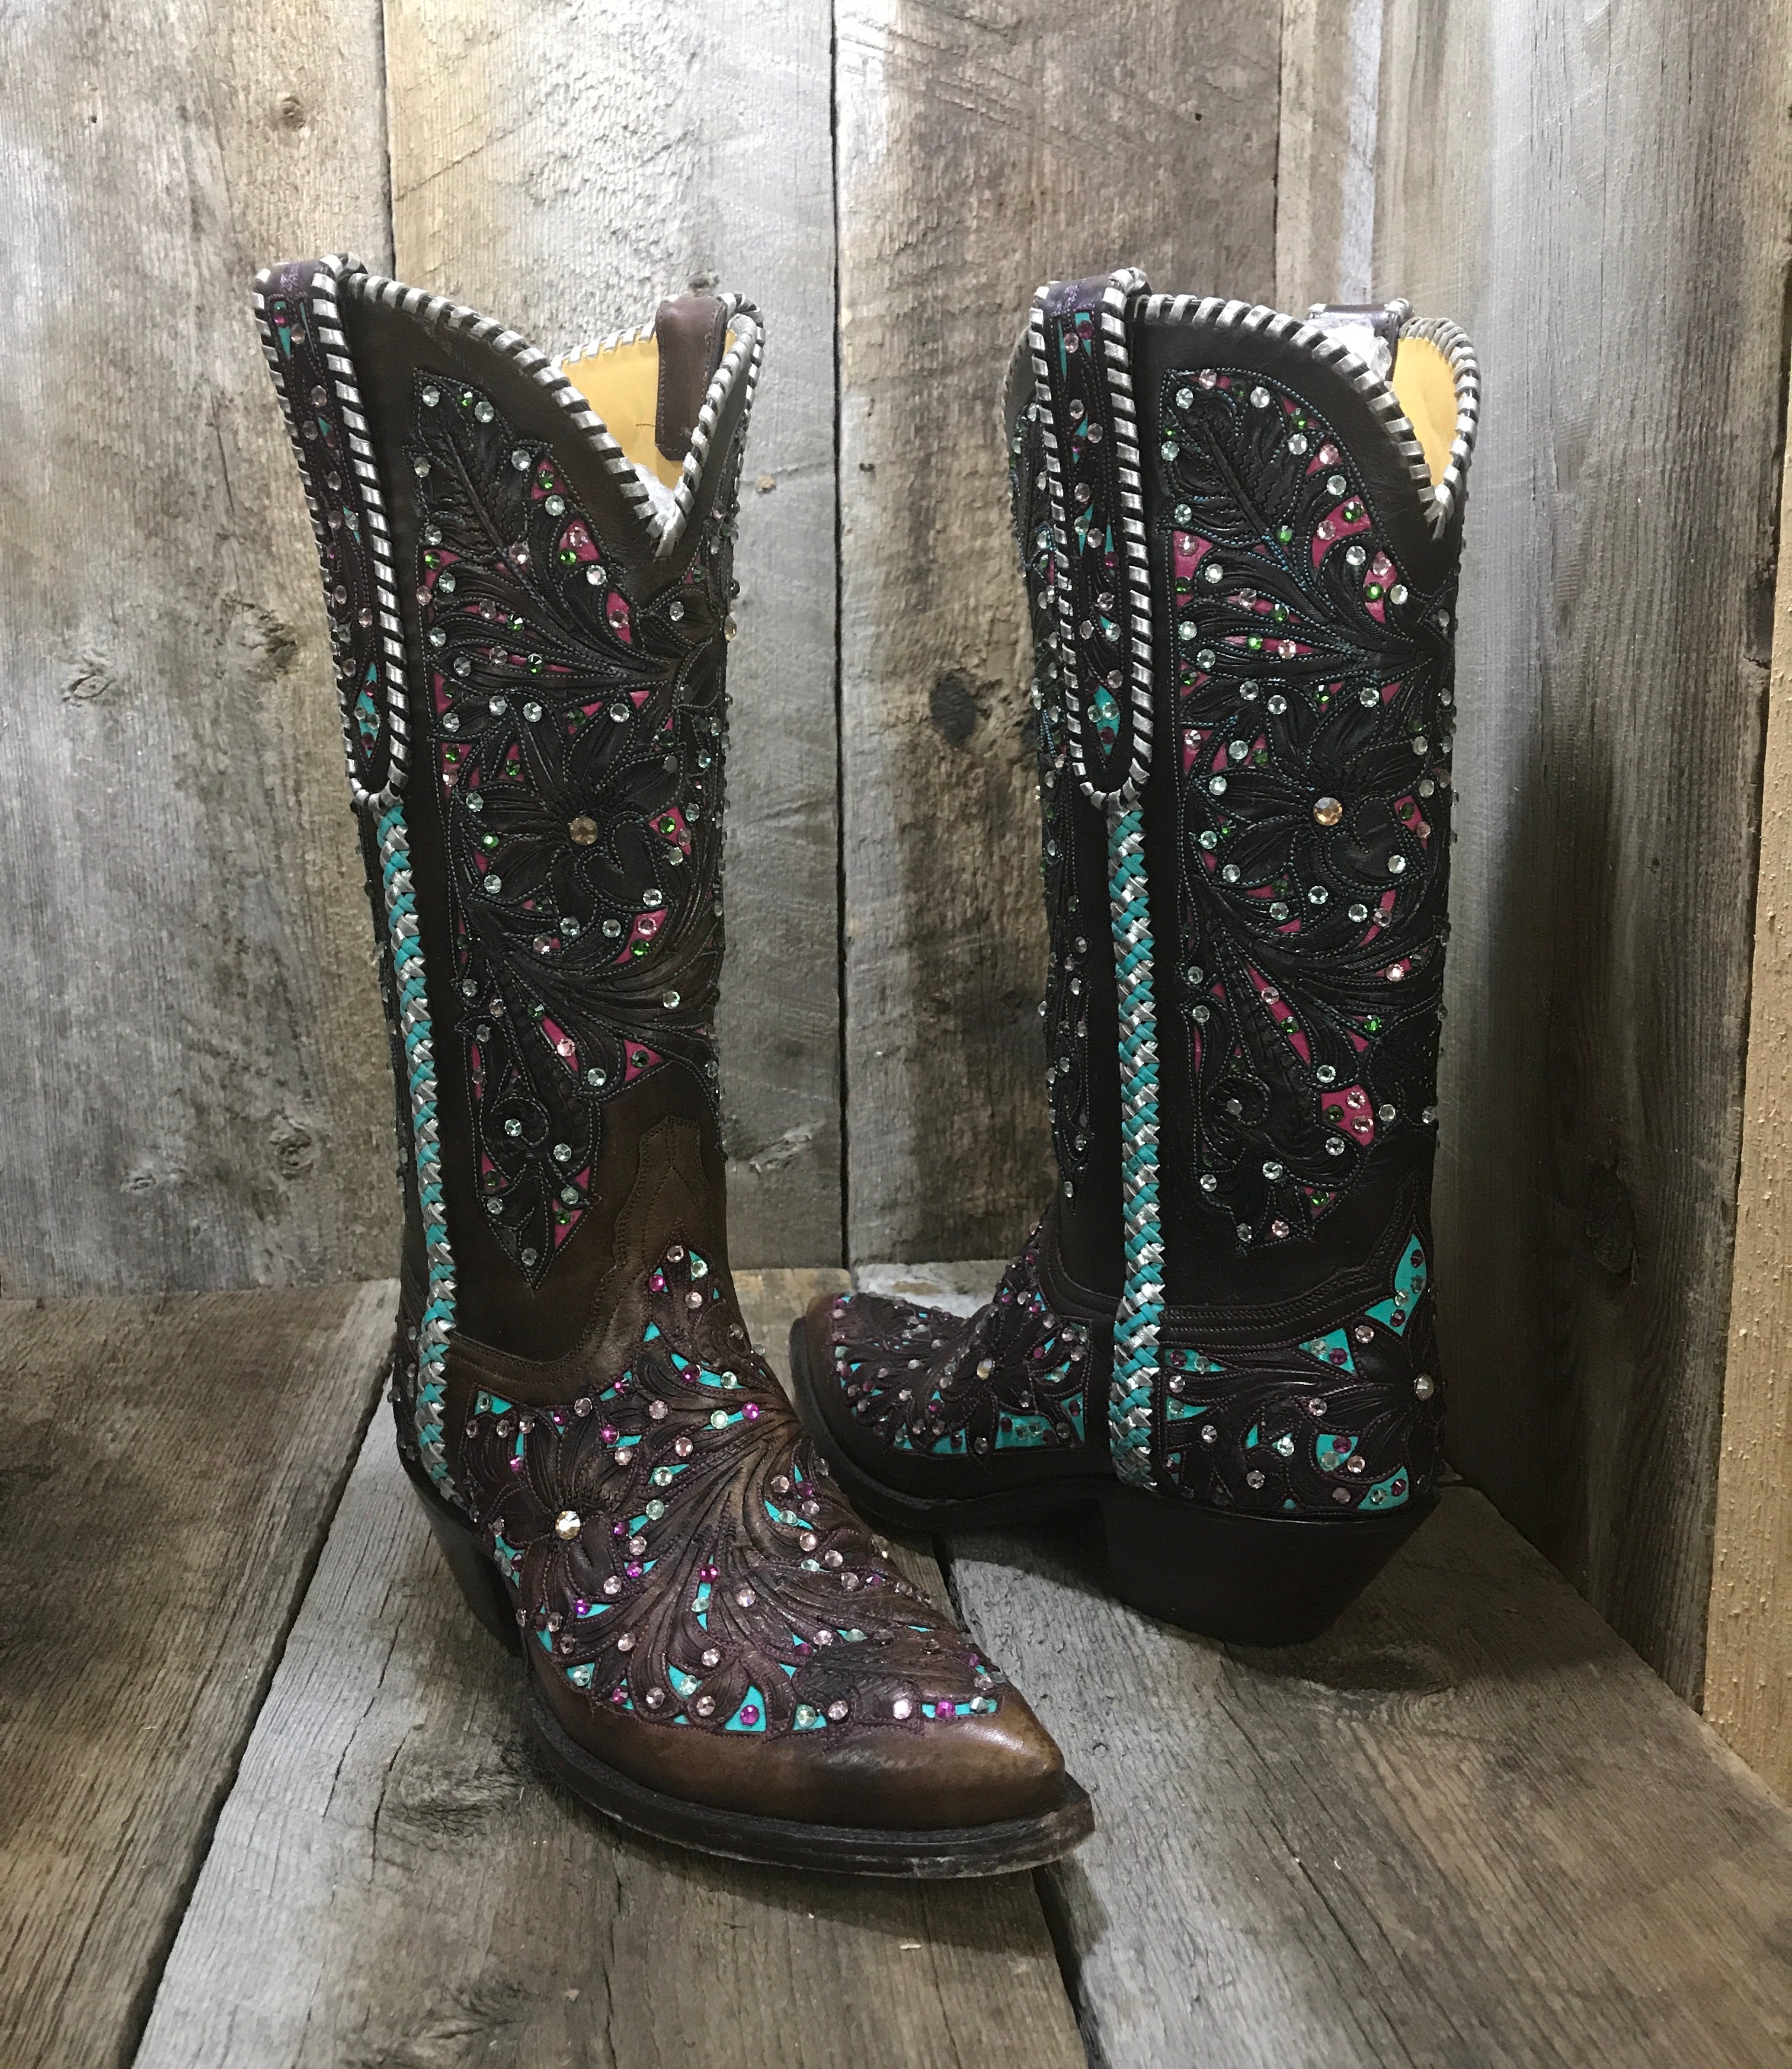 gypsy rose women's boots